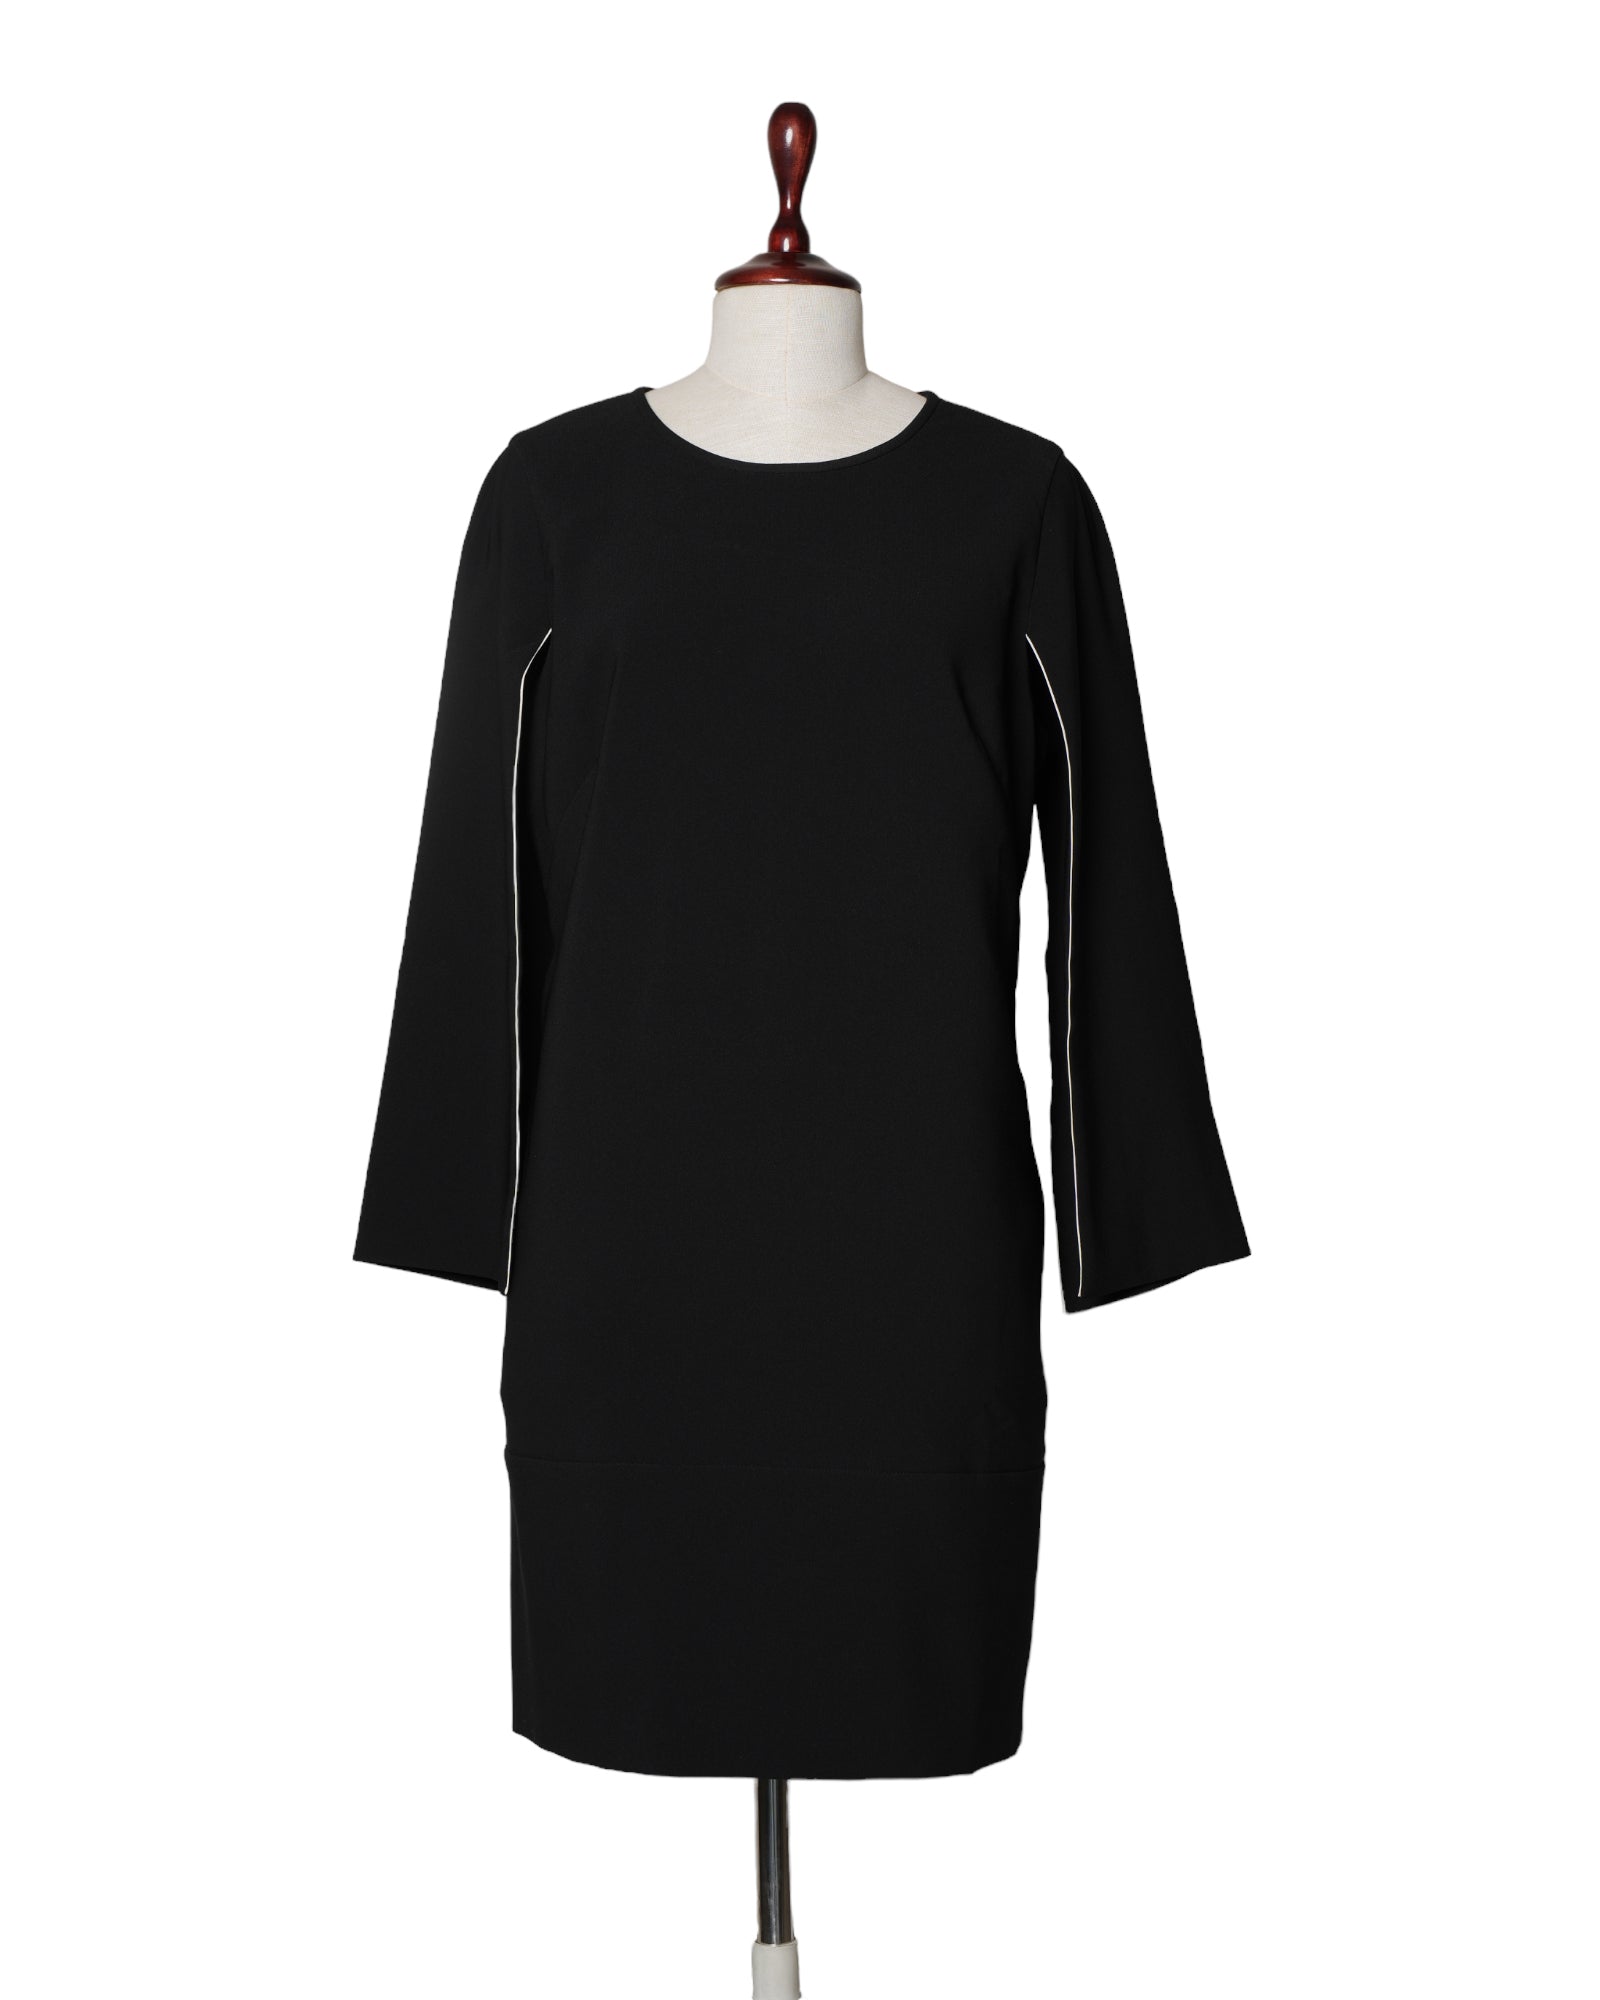 Dkny Black Dress With White Piping